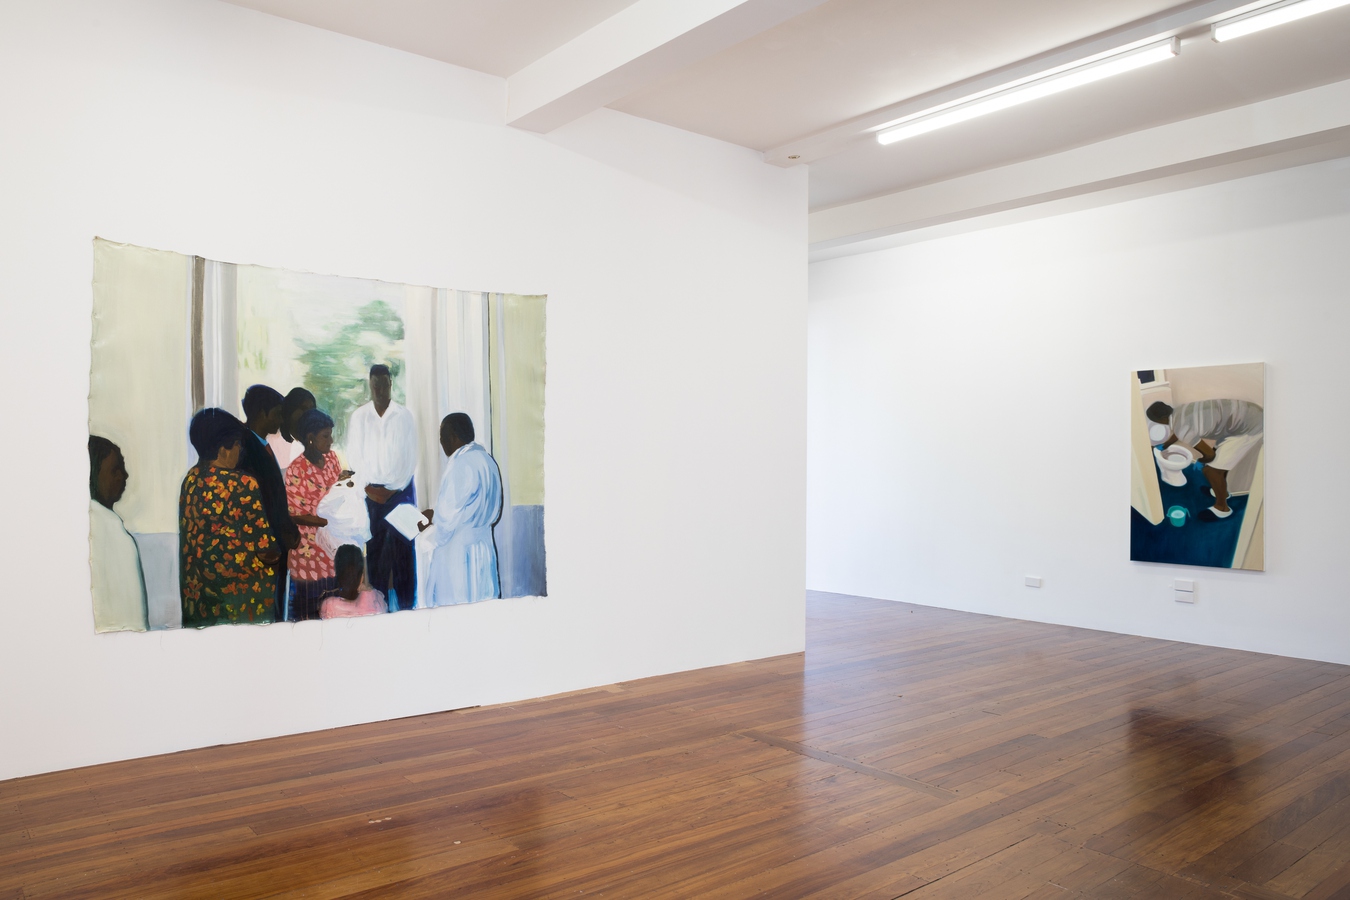 brunelle dias, the way things are (installation view), 2022. Photo by Janneth Gil.